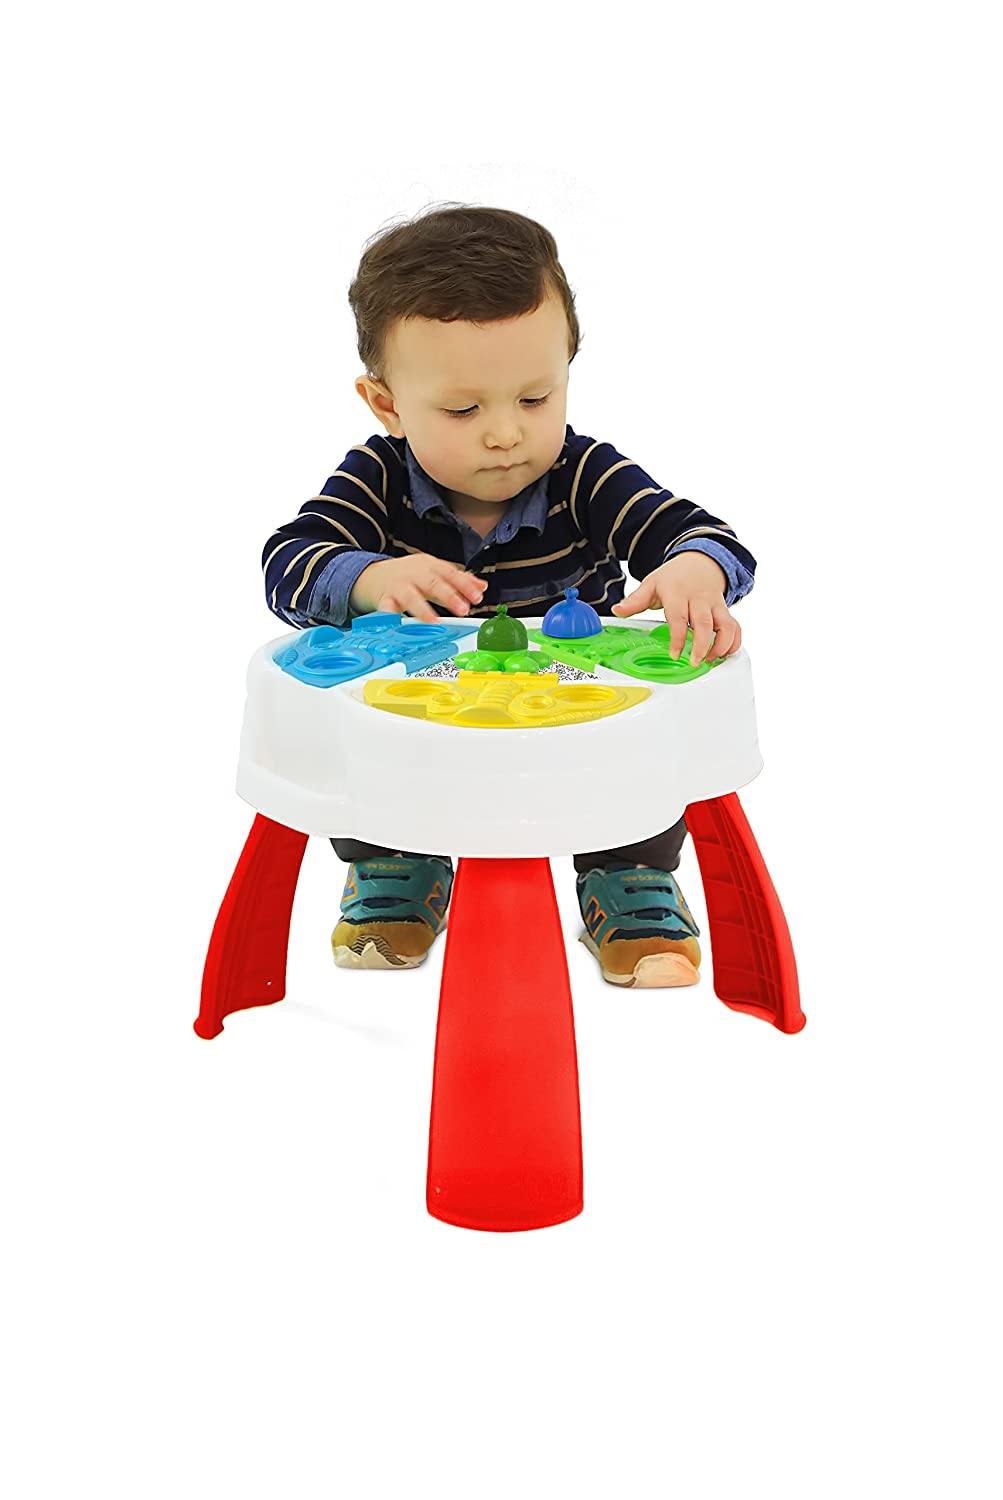 Activity Table & Educational Beads | Lalaboom - Krazy Caterpillar 